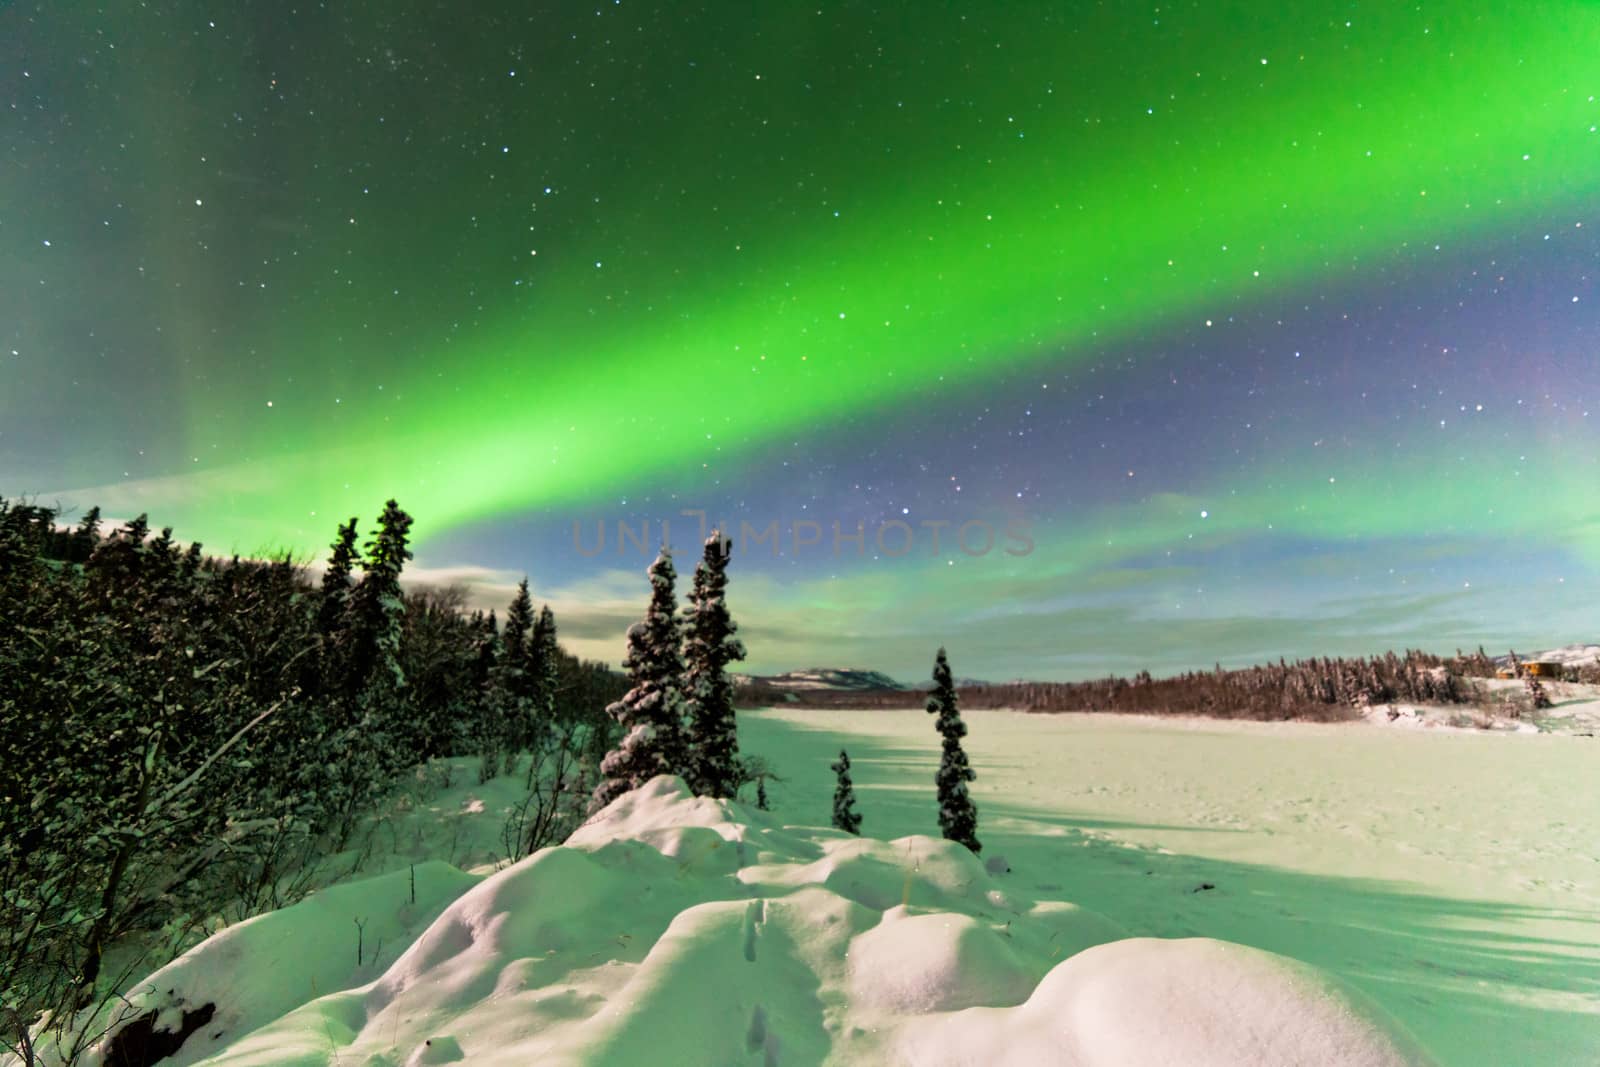 Spectacular display of intense Northern Lights or Aurora borealis or polar lights forming green swirls over snowy winter landscape of frozen Lake Laberge Yukon Territory Canada